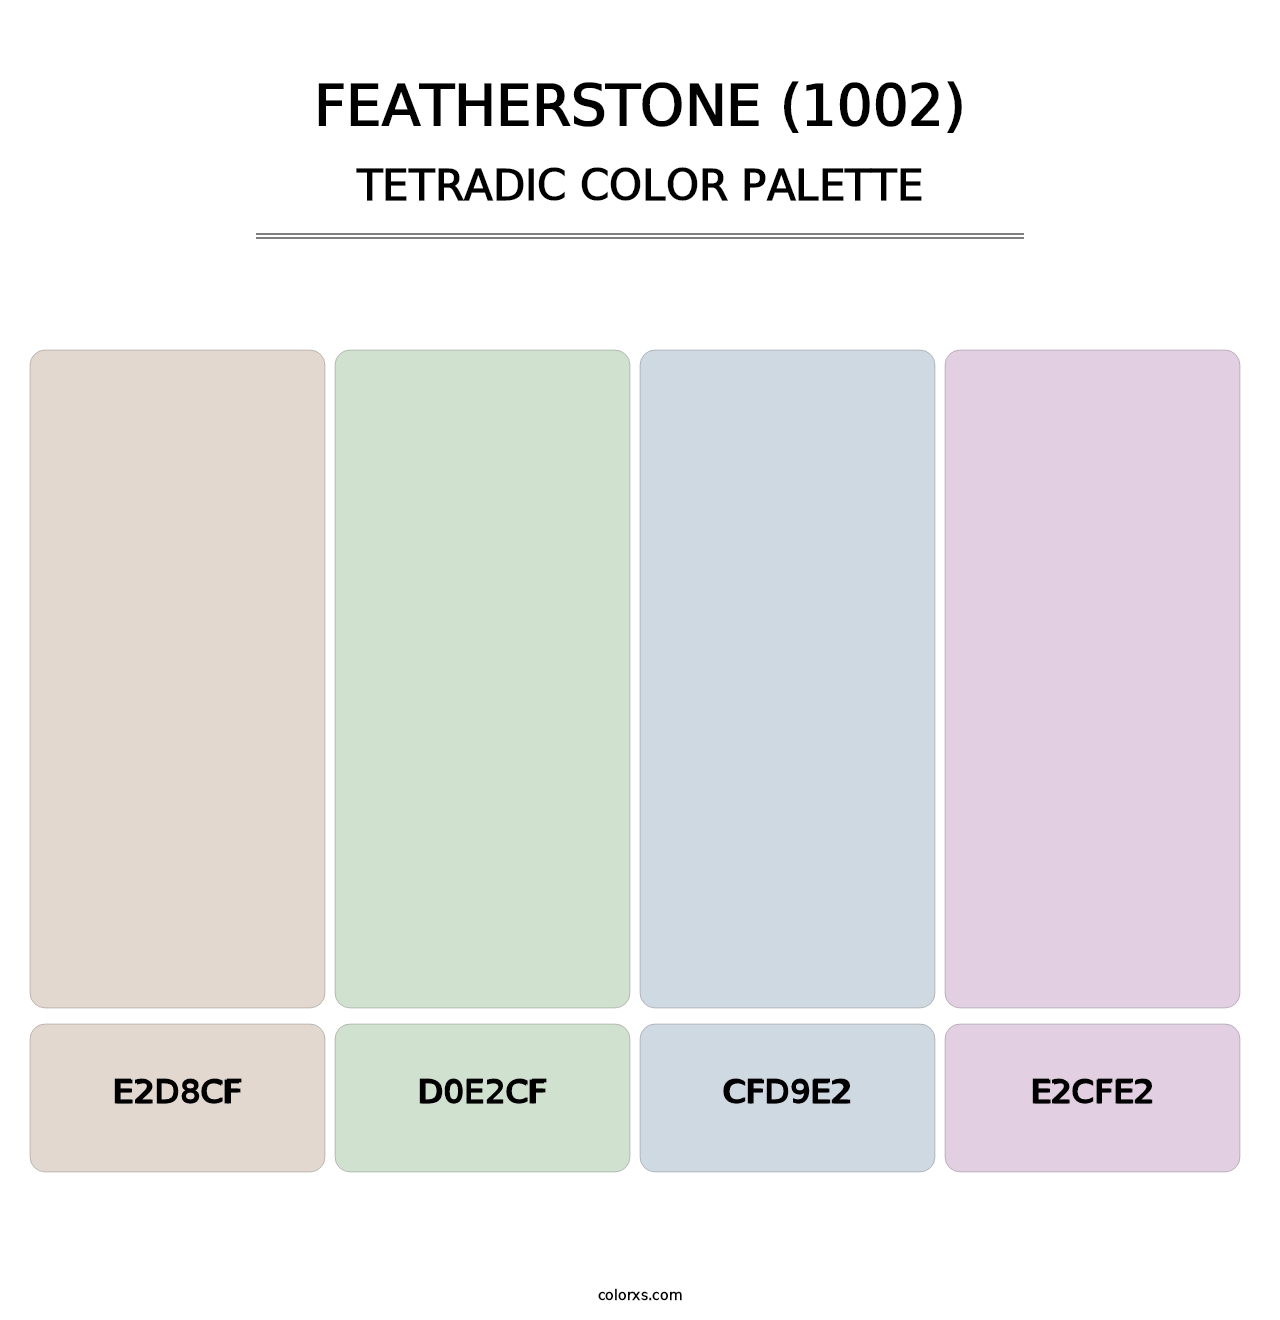 Featherstone (1002) - Tetradic Color Palette